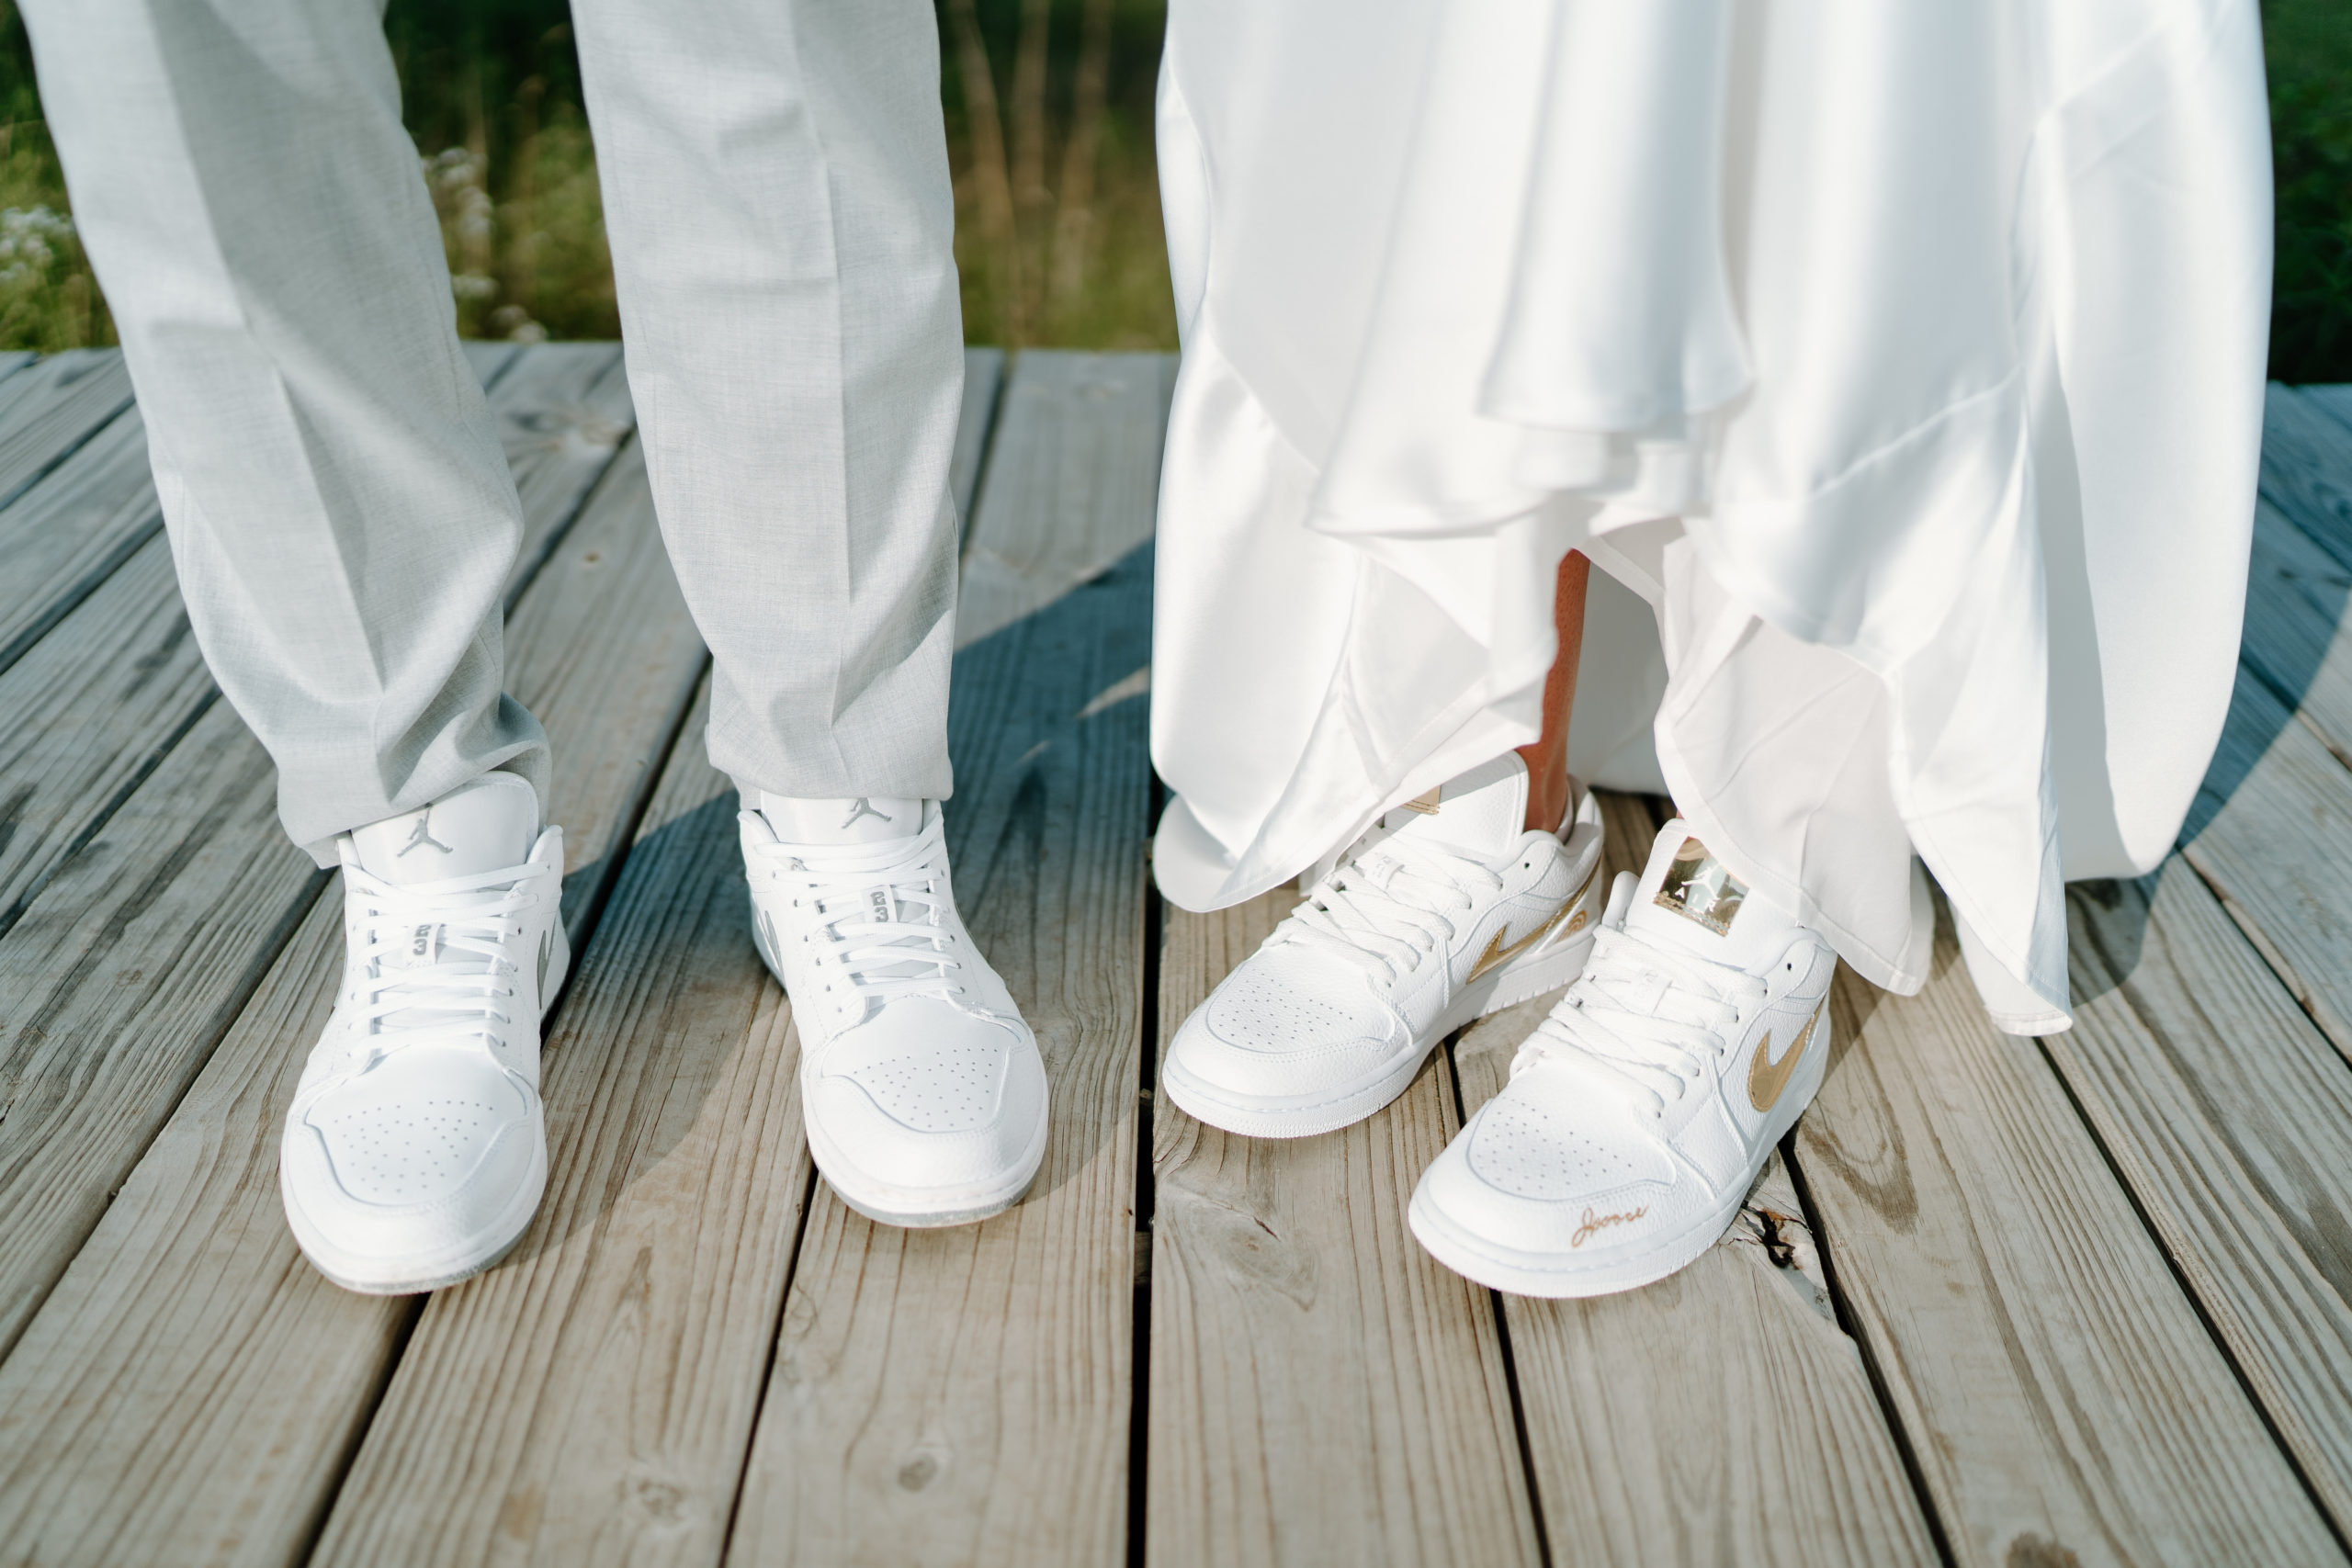 This is a bride and groom wearing jordans on their wedding day